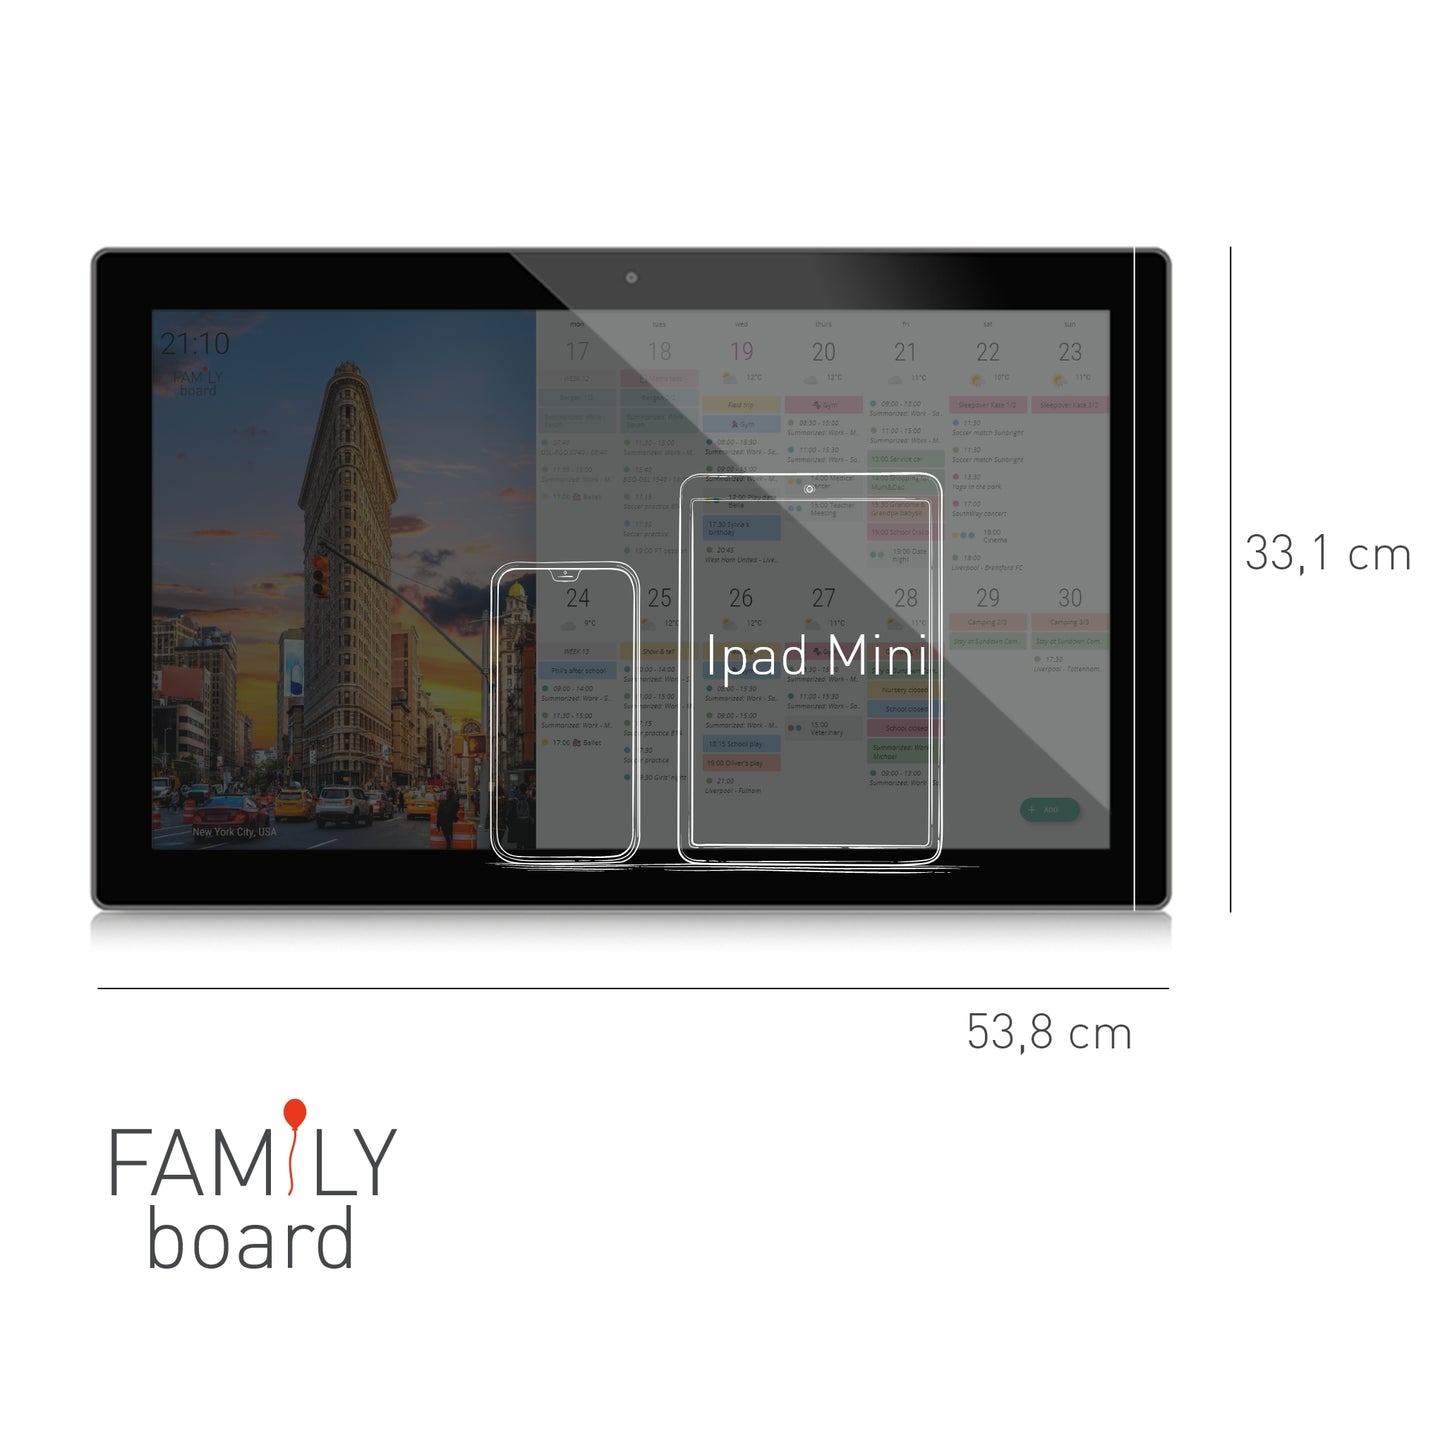 FamilyBoard incl. 1 year subscription